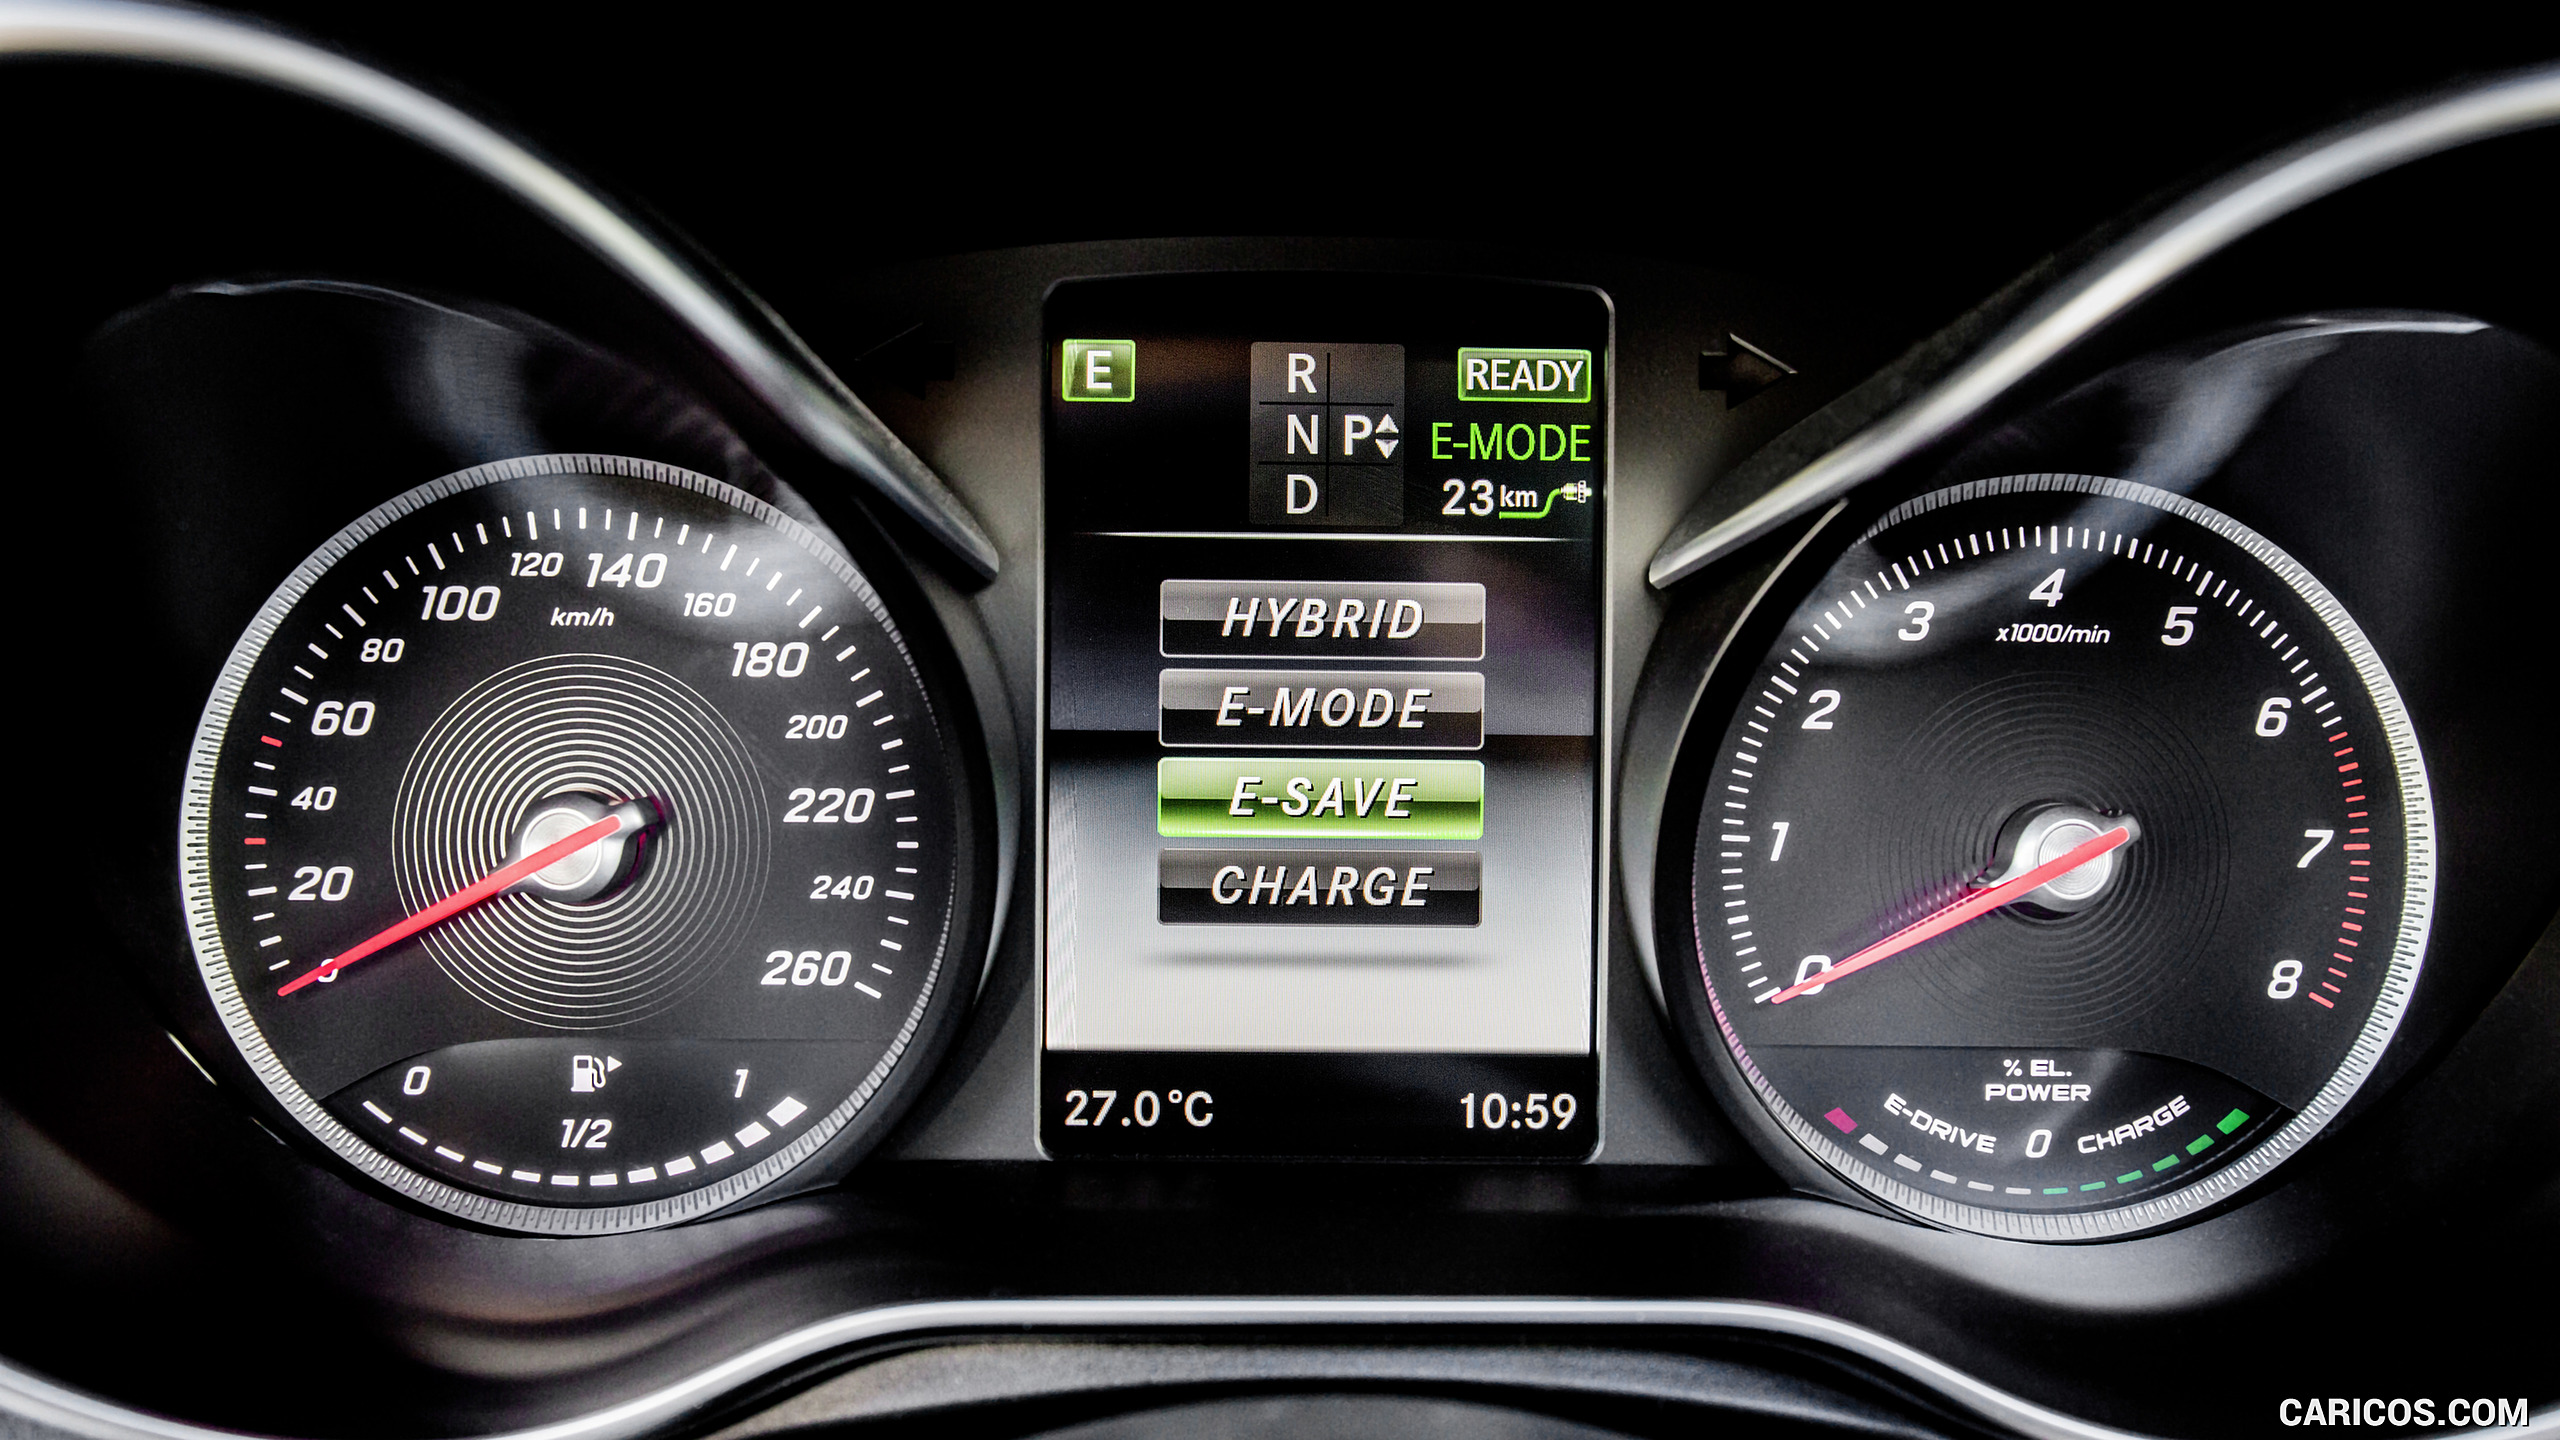 2017 Mercedes-Benz GLC 350 e Coupe Plug-in-Hybrid - Instrument Cluster, #132 of 144